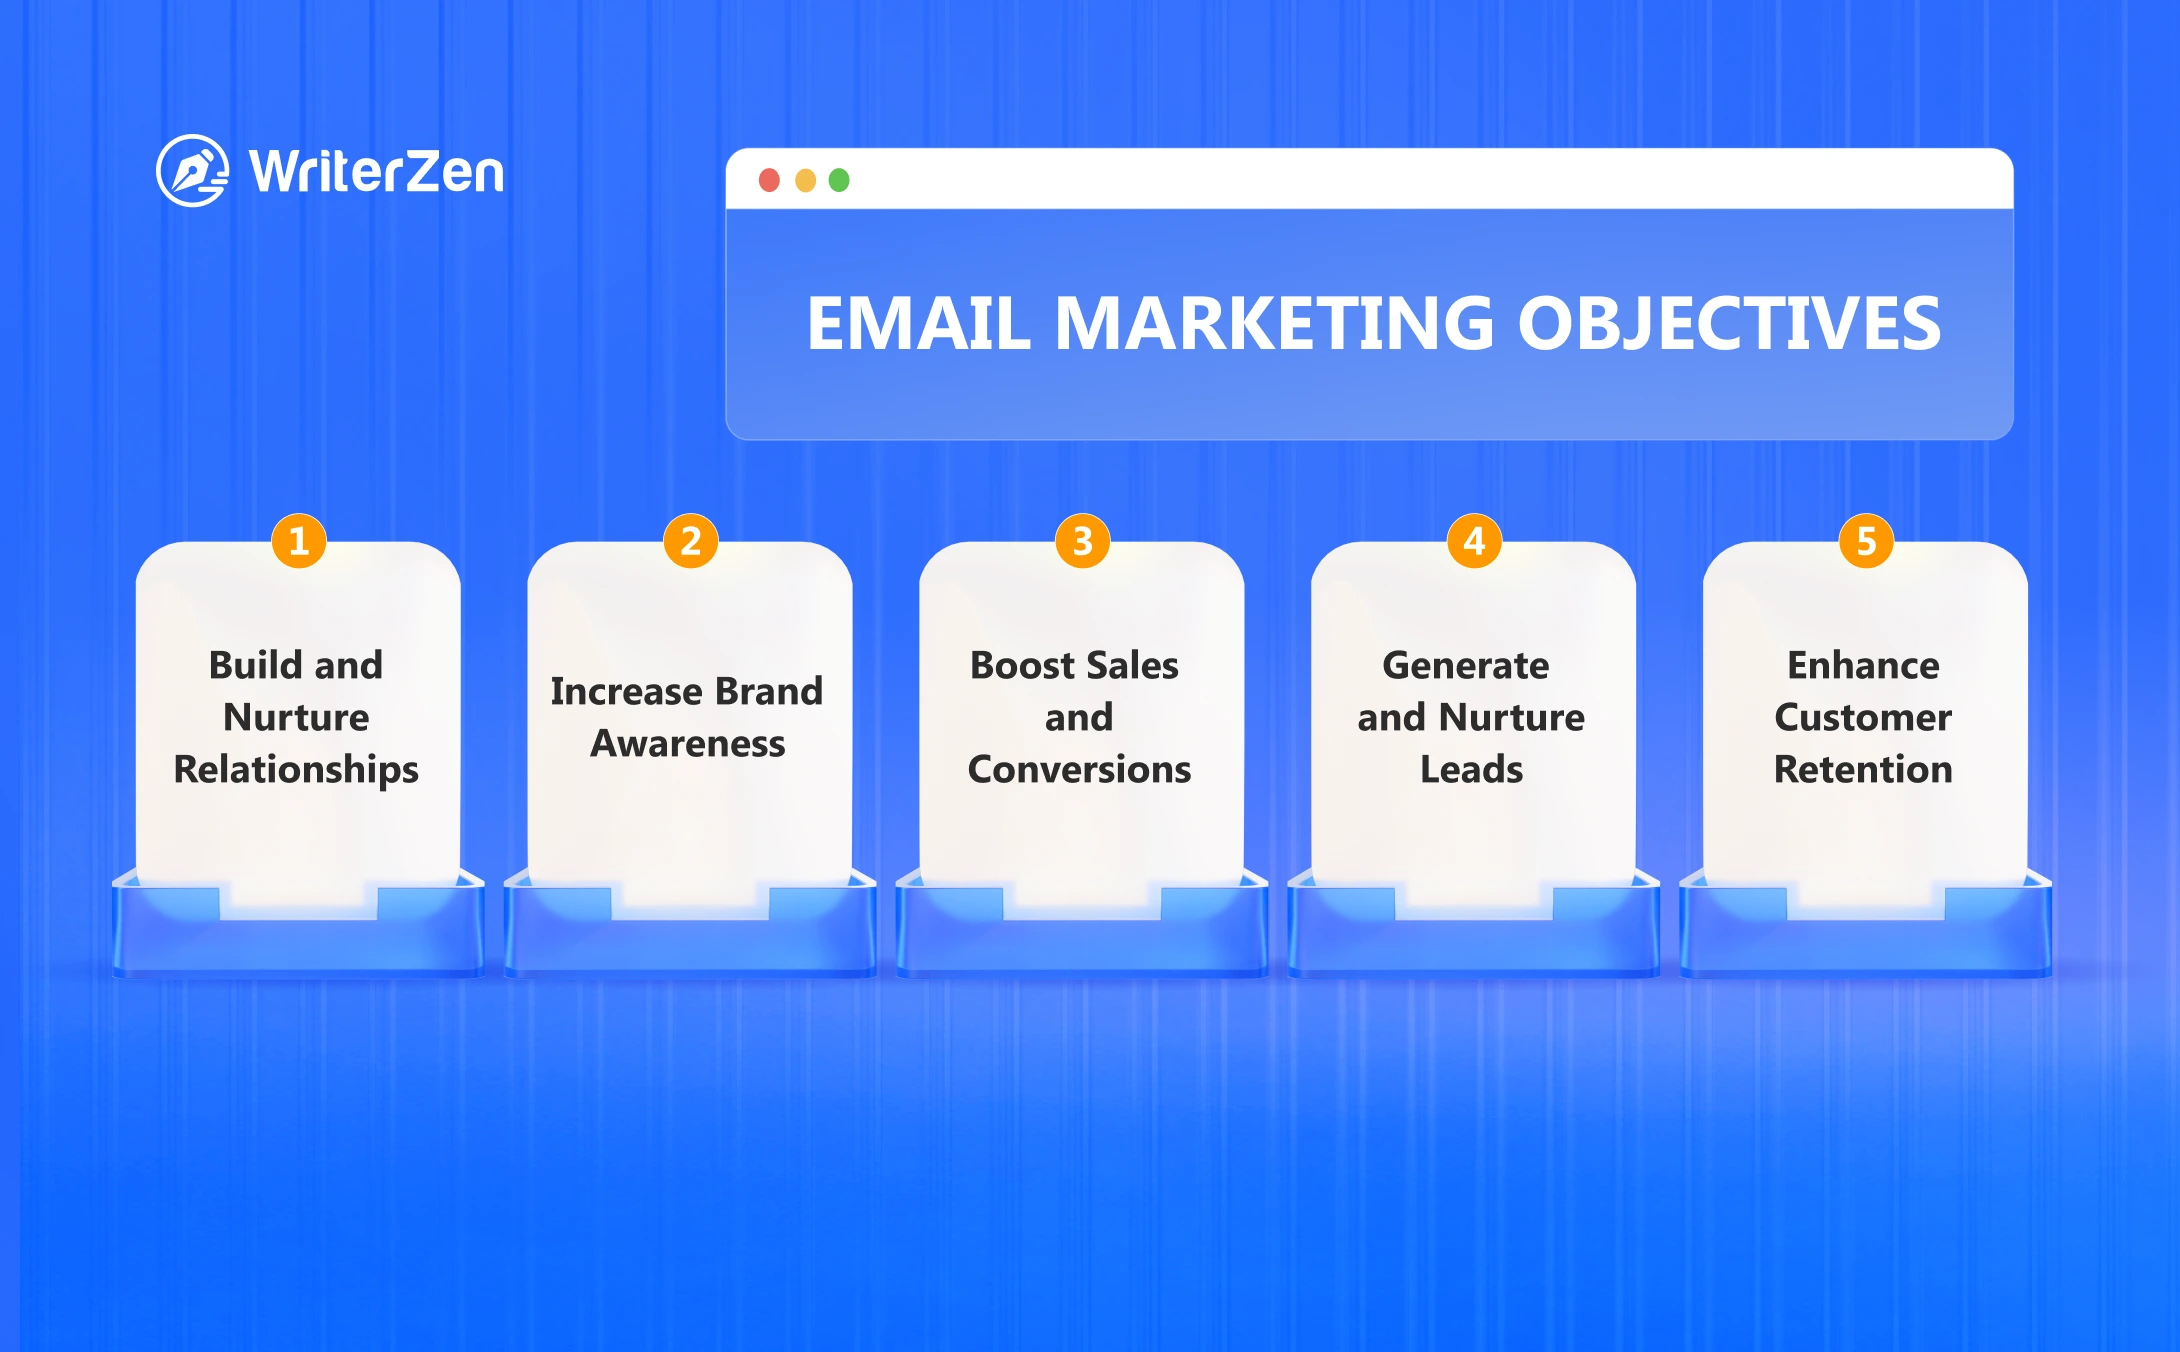 The Goals of Email Marketing